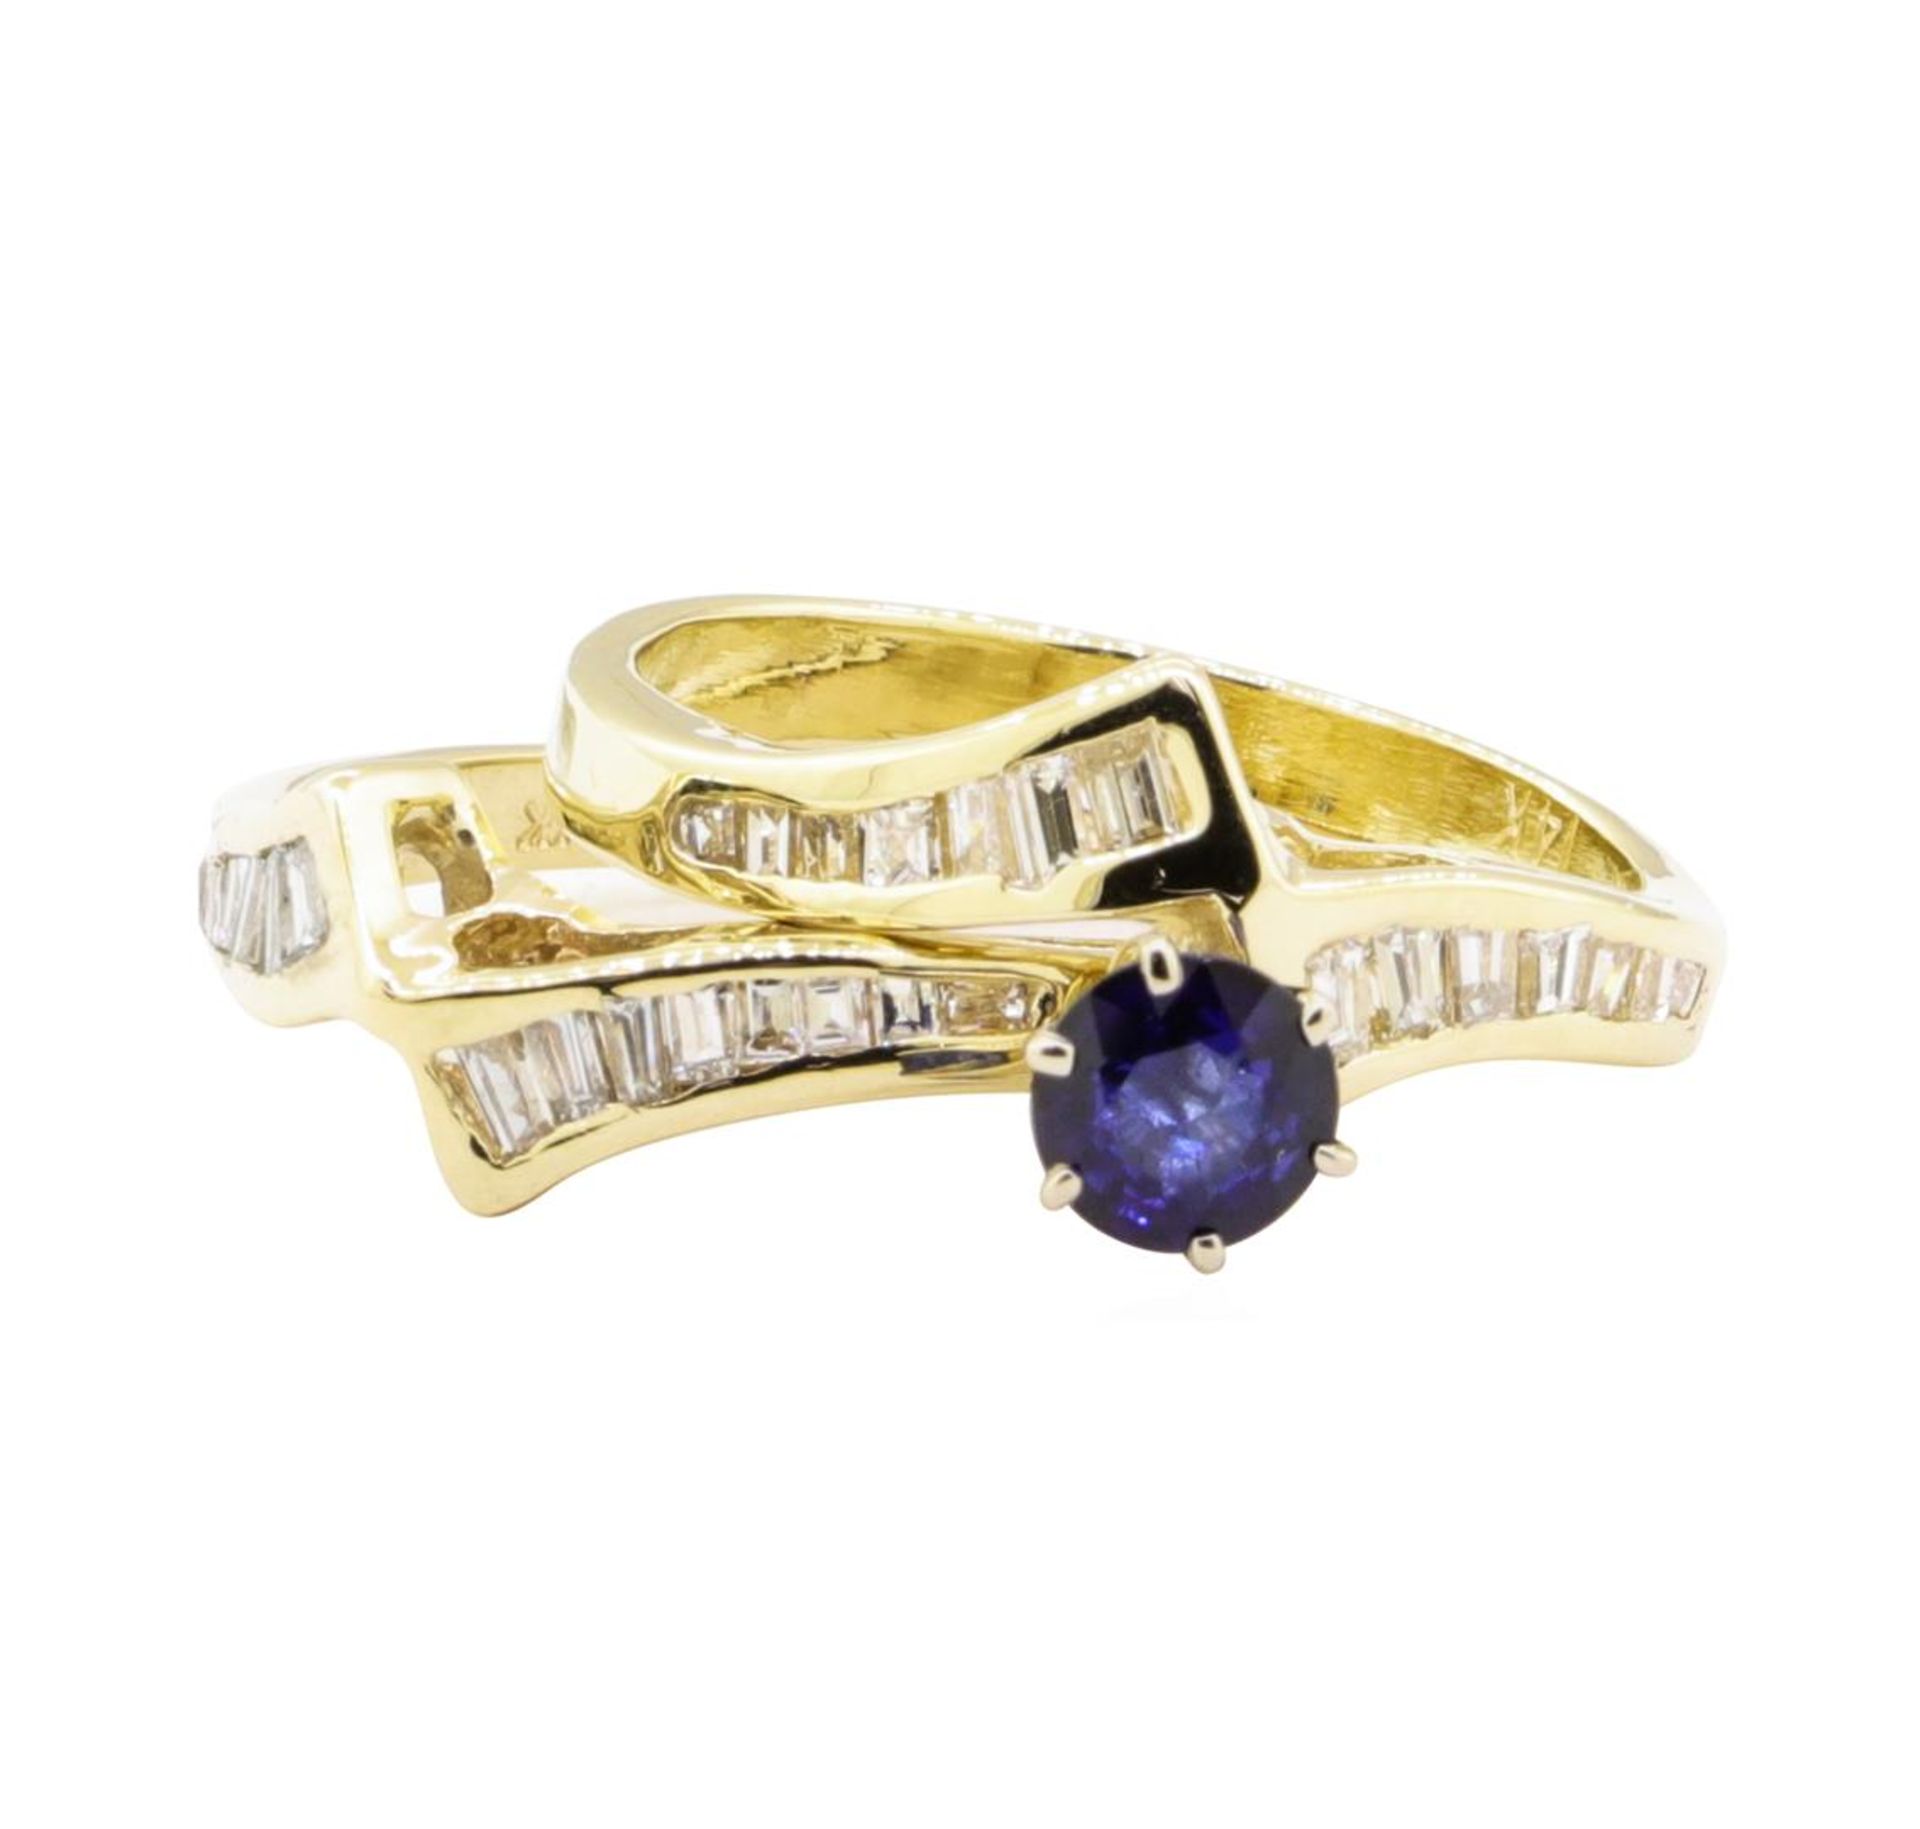 1.03 ctw Blue Sapphire And Diamond Ring And Band - 14KT Yellow Gold - Image 3 of 4